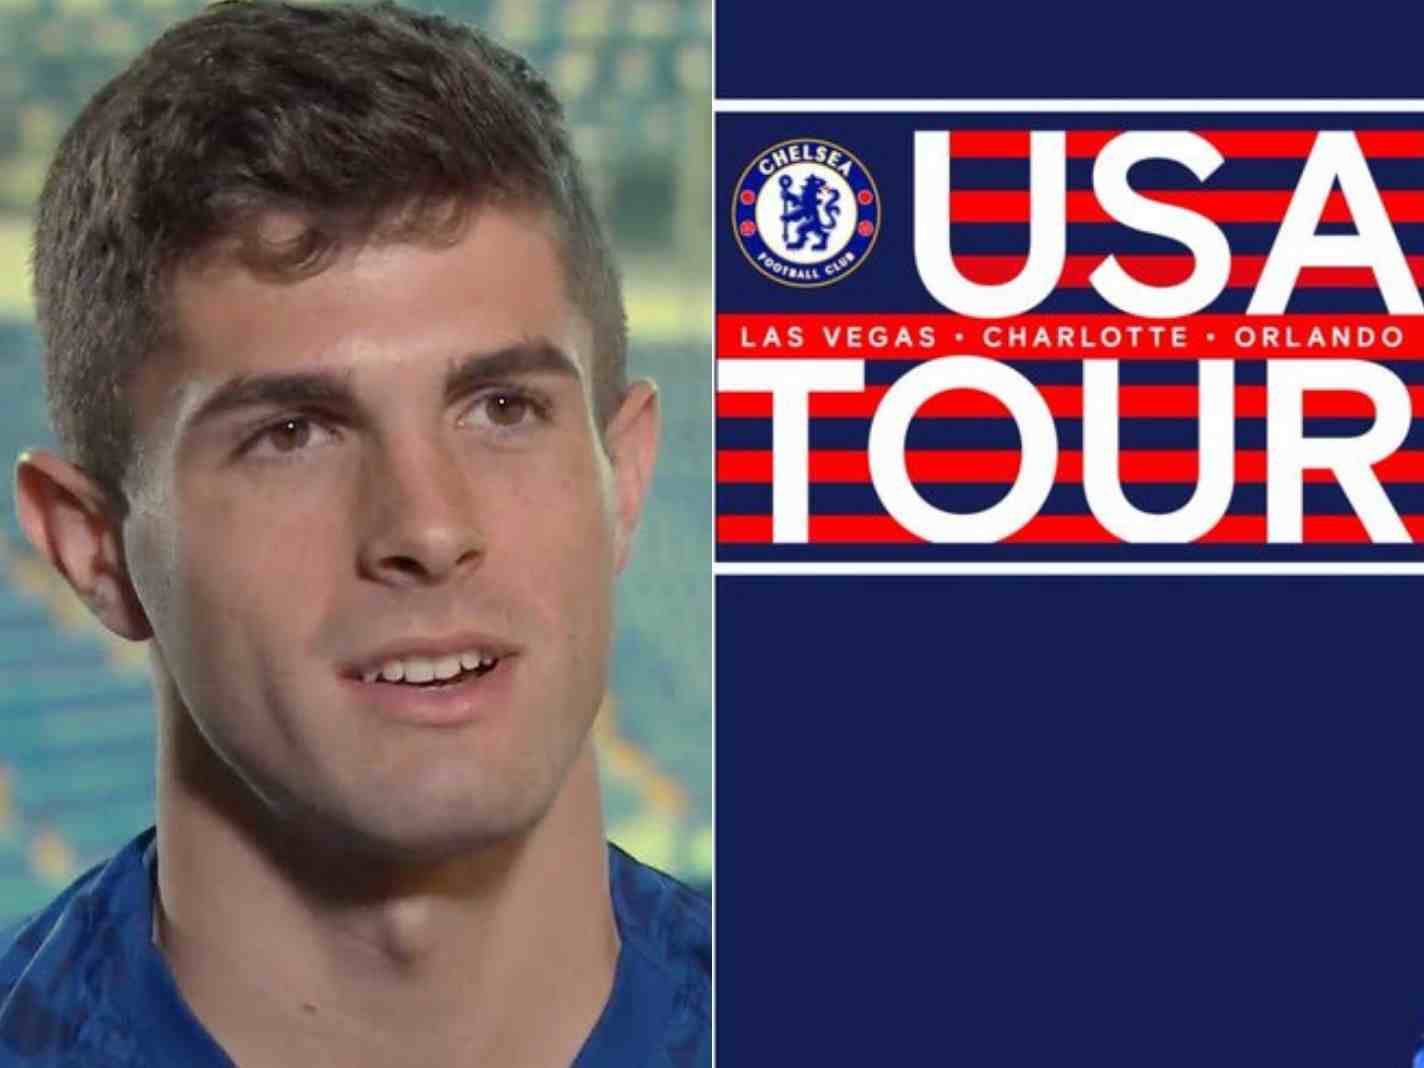 A two photo collage featuring Christian Pulisic and a screenshot of the promo of Chelsea's USA tour